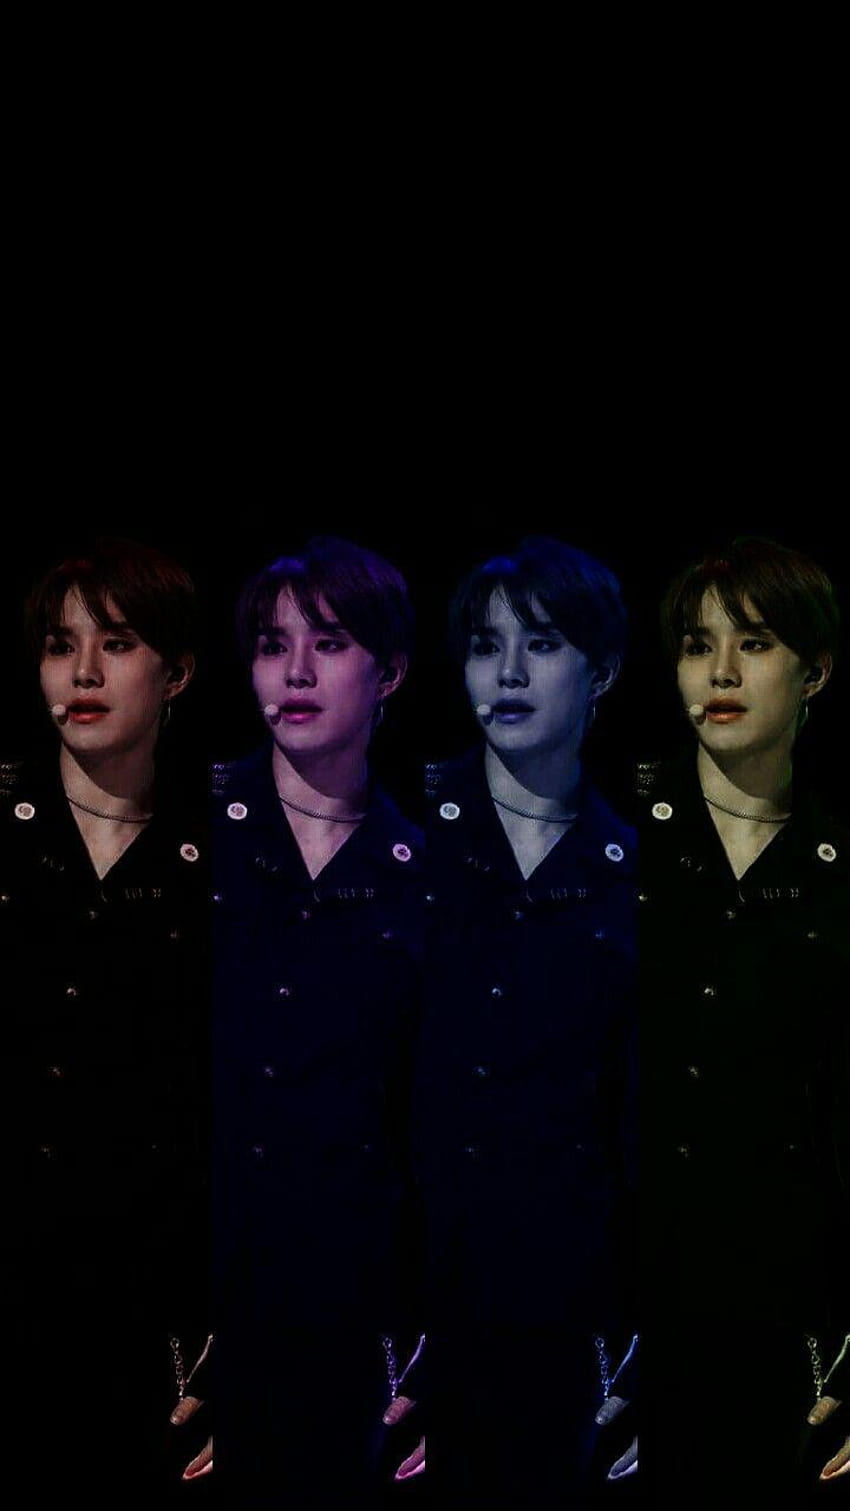 Limo Rai on JUNGWOO♡ in 2019, iphone jungwoo nct HD phone wallpaper